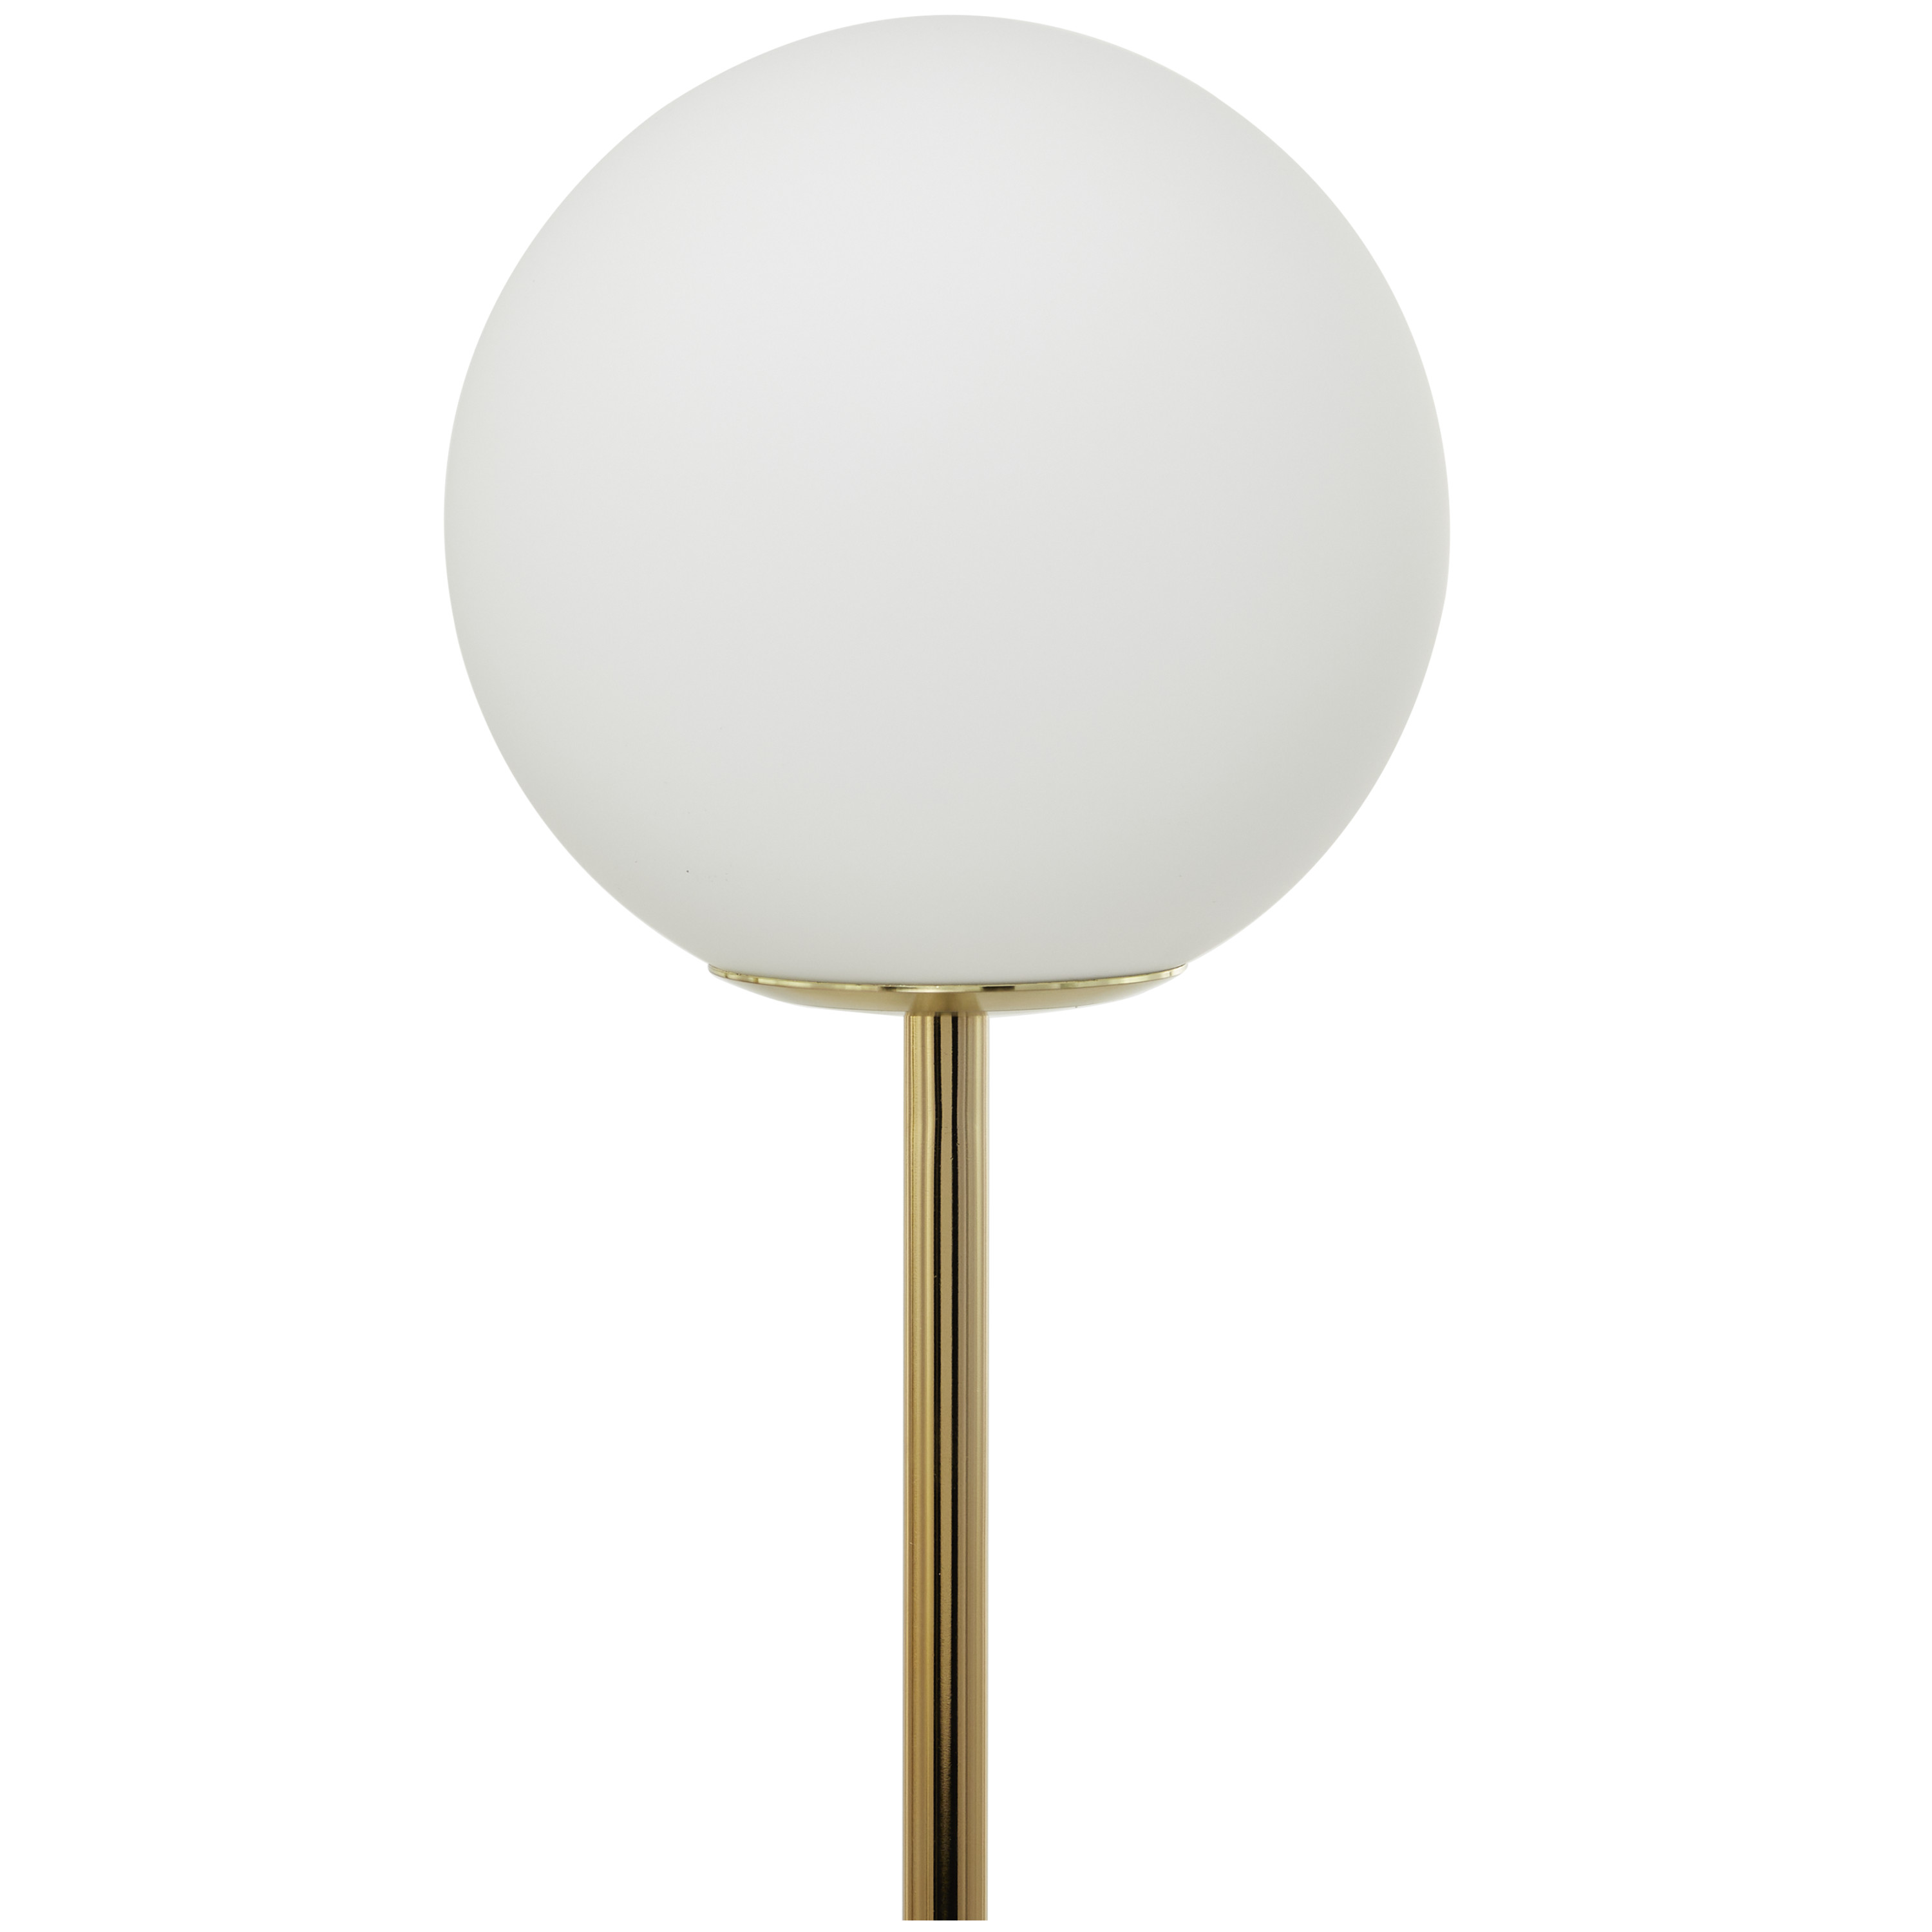 DecMode 73" 2 Light Orb Gold Floor Lamp with White Glass Shade - image 6 of 9